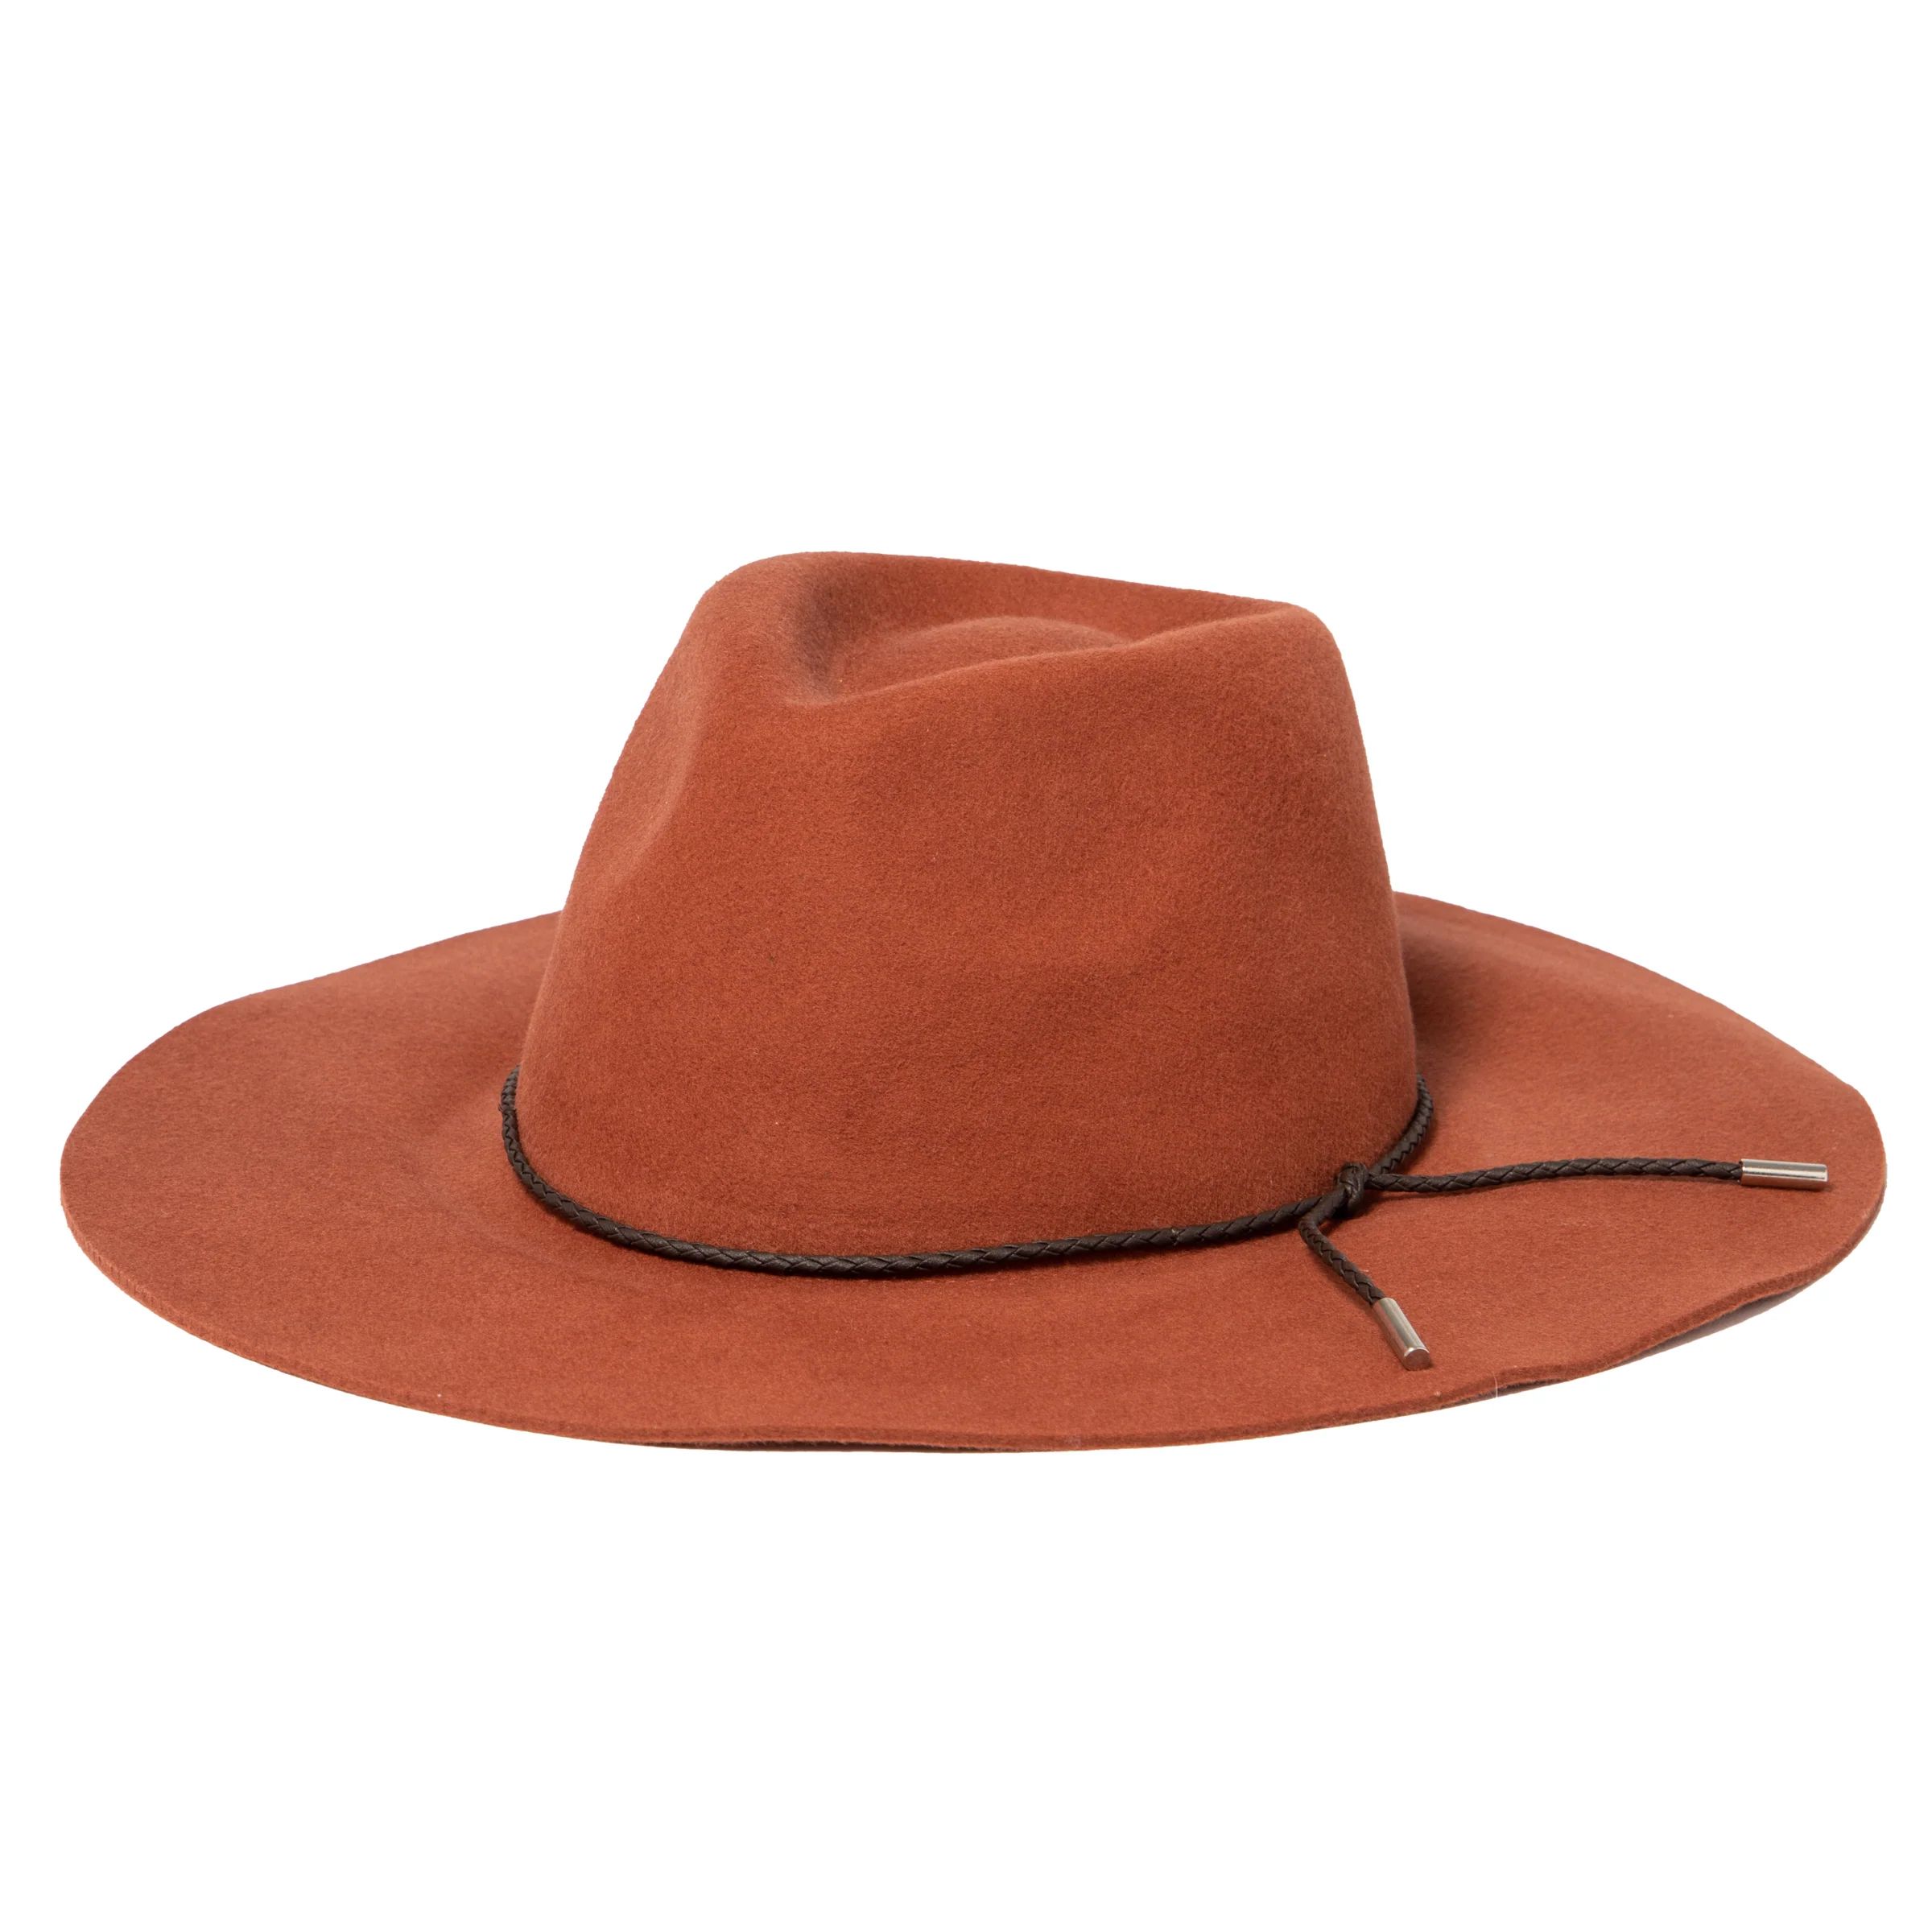 Anza Floppy Packable Hat | San Diego Hat Company